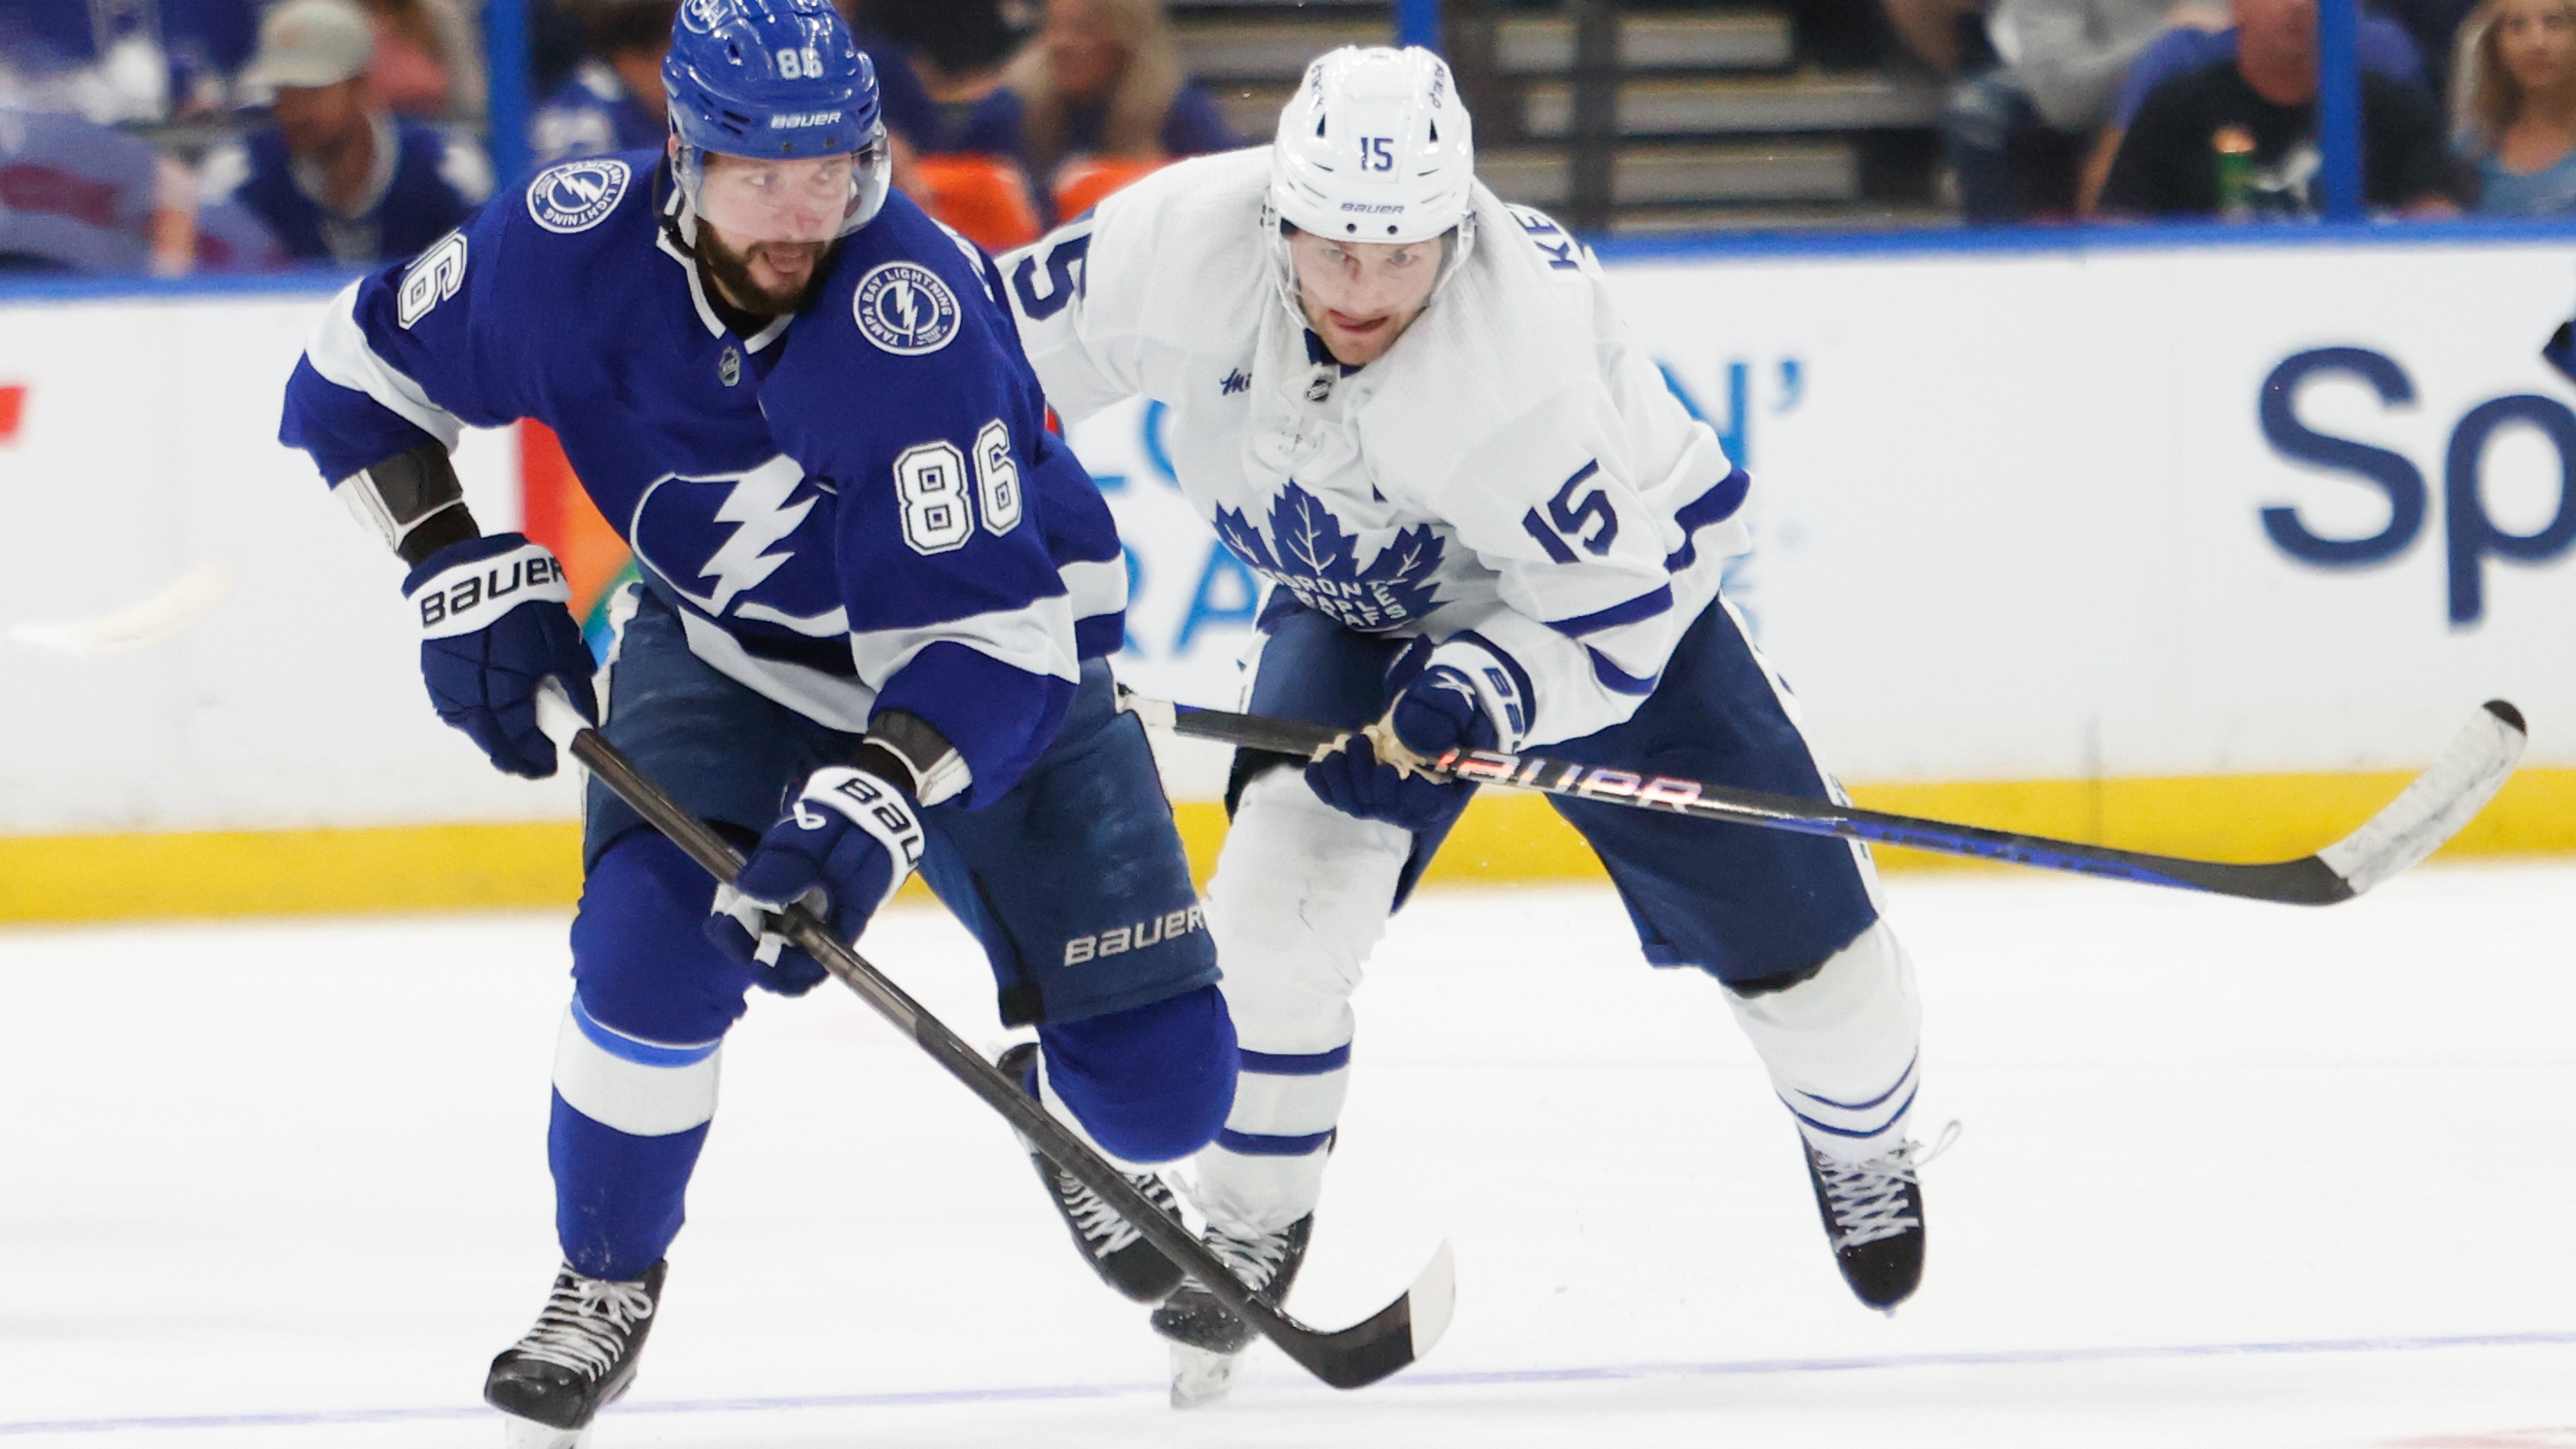 Maple Leafs-Lightning schedule: Full list of dates, start times